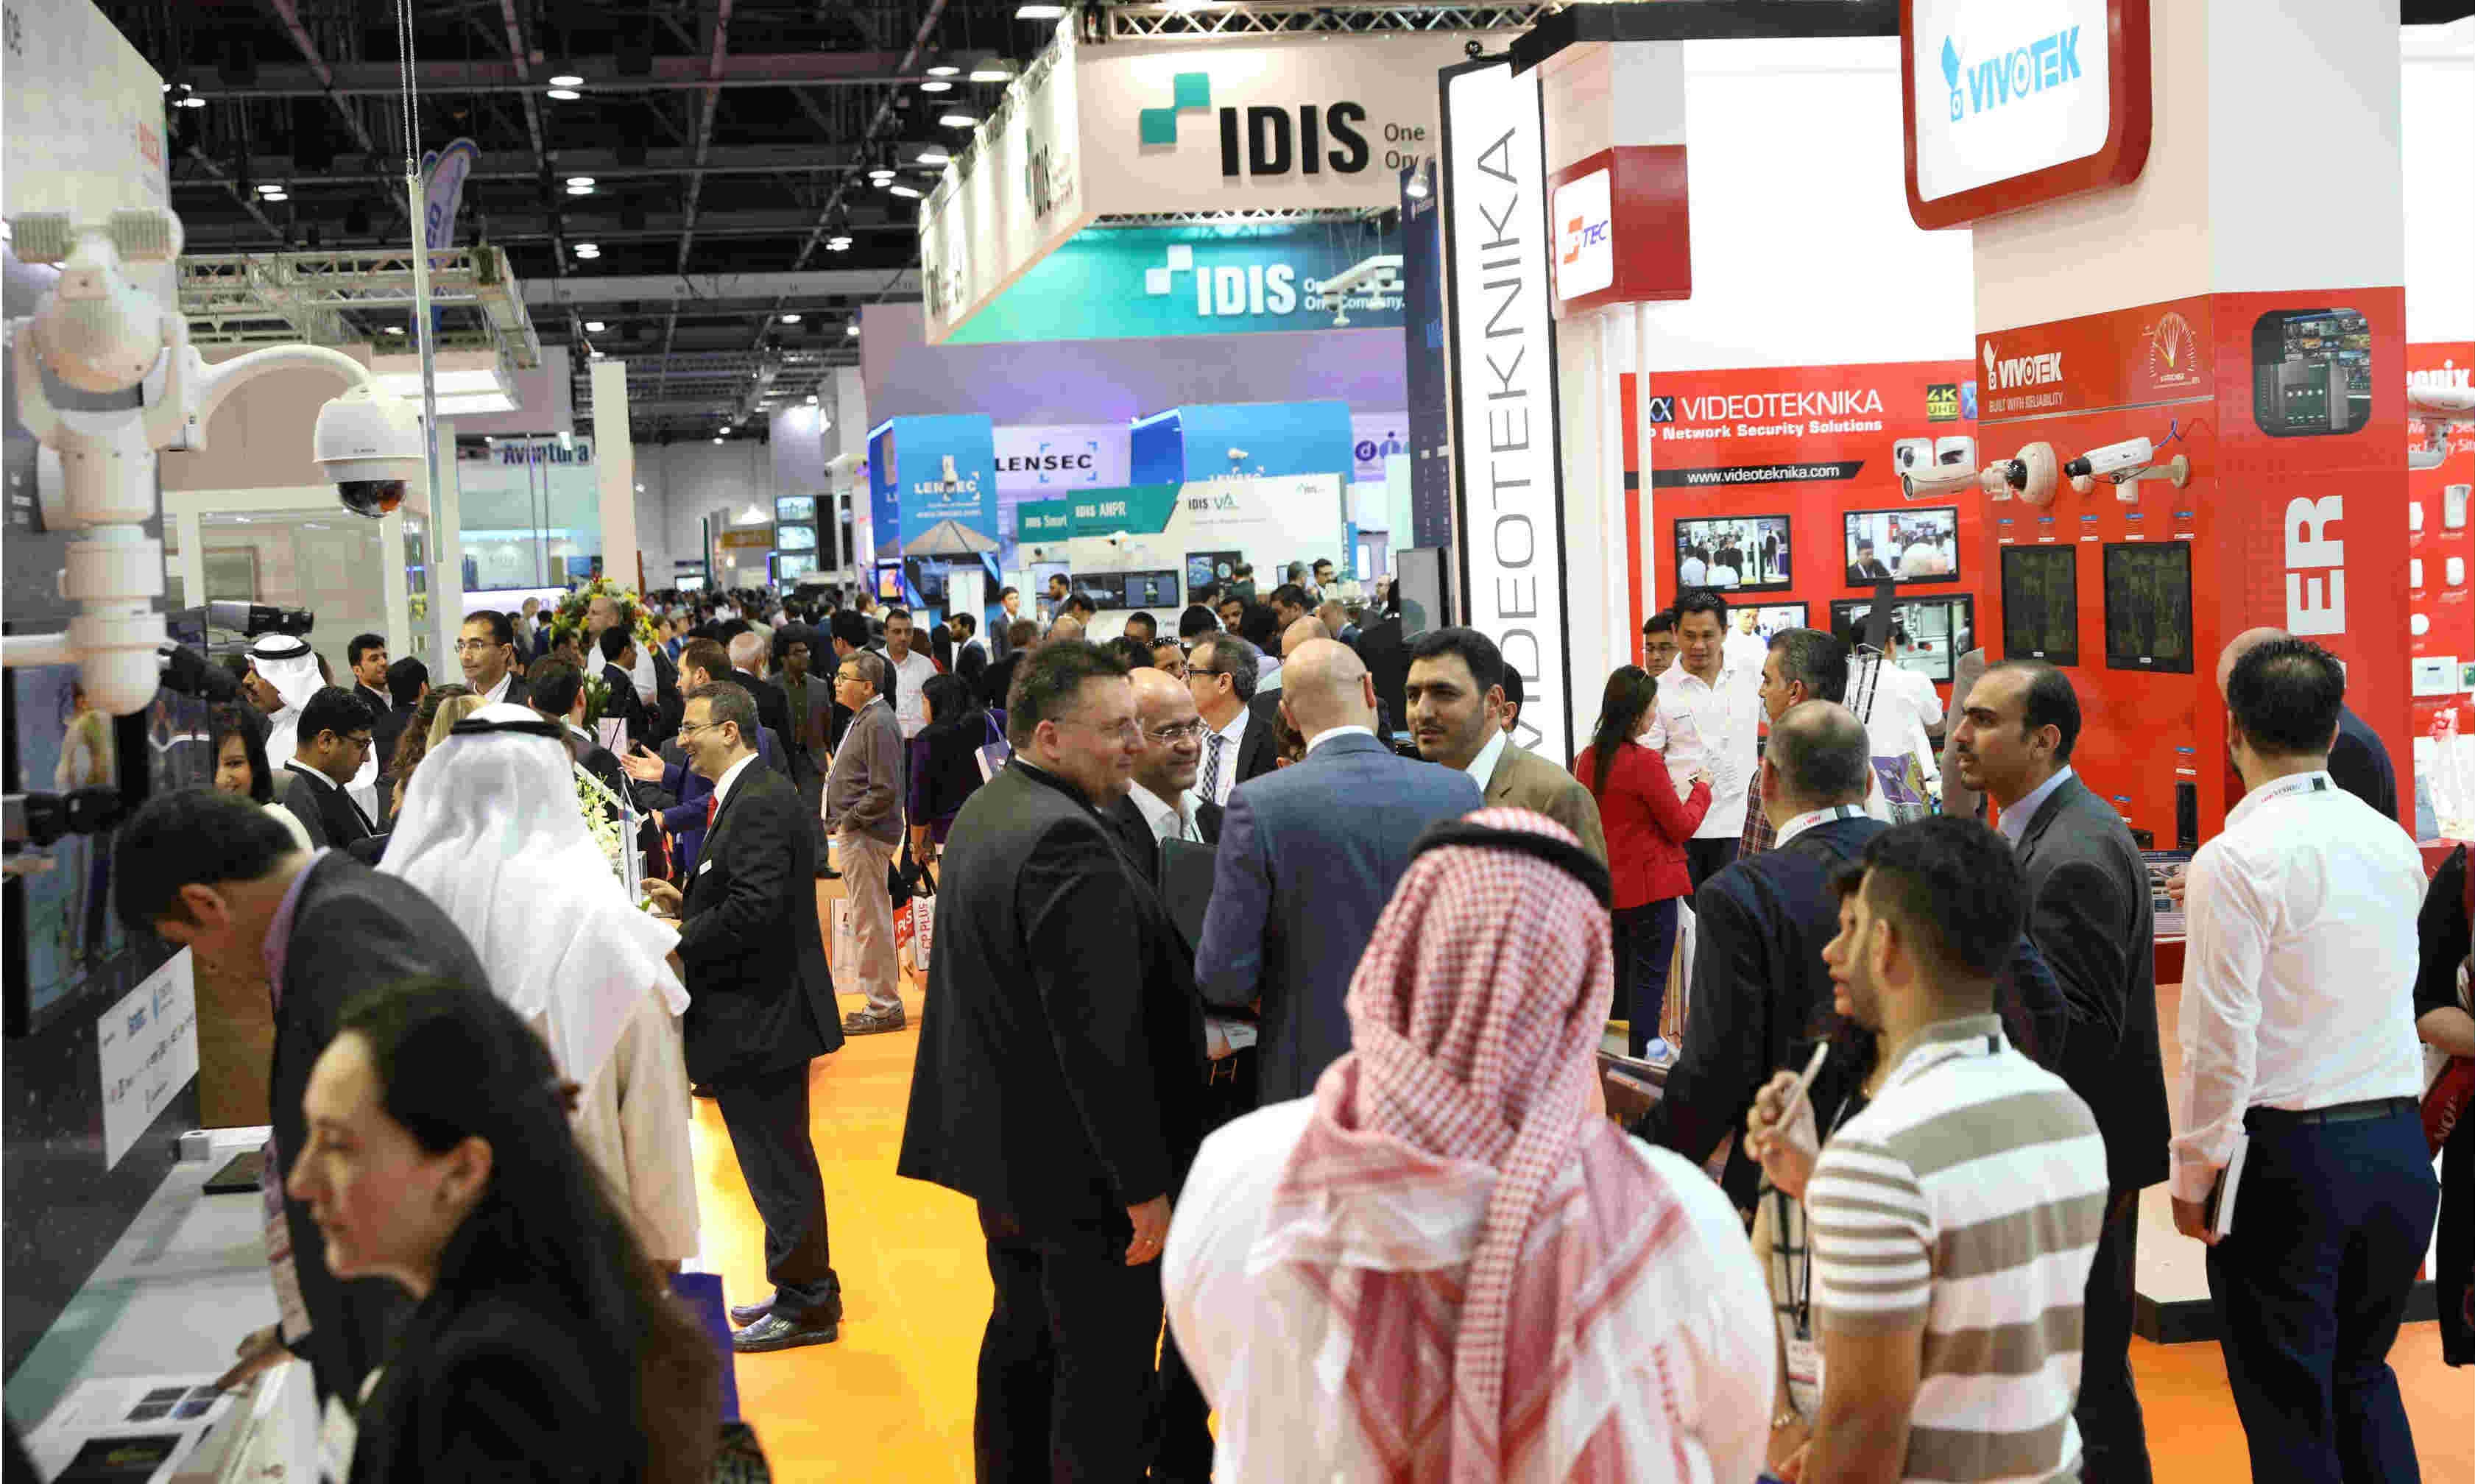 Celebrating 20 years, Intersec looks ahead to further success